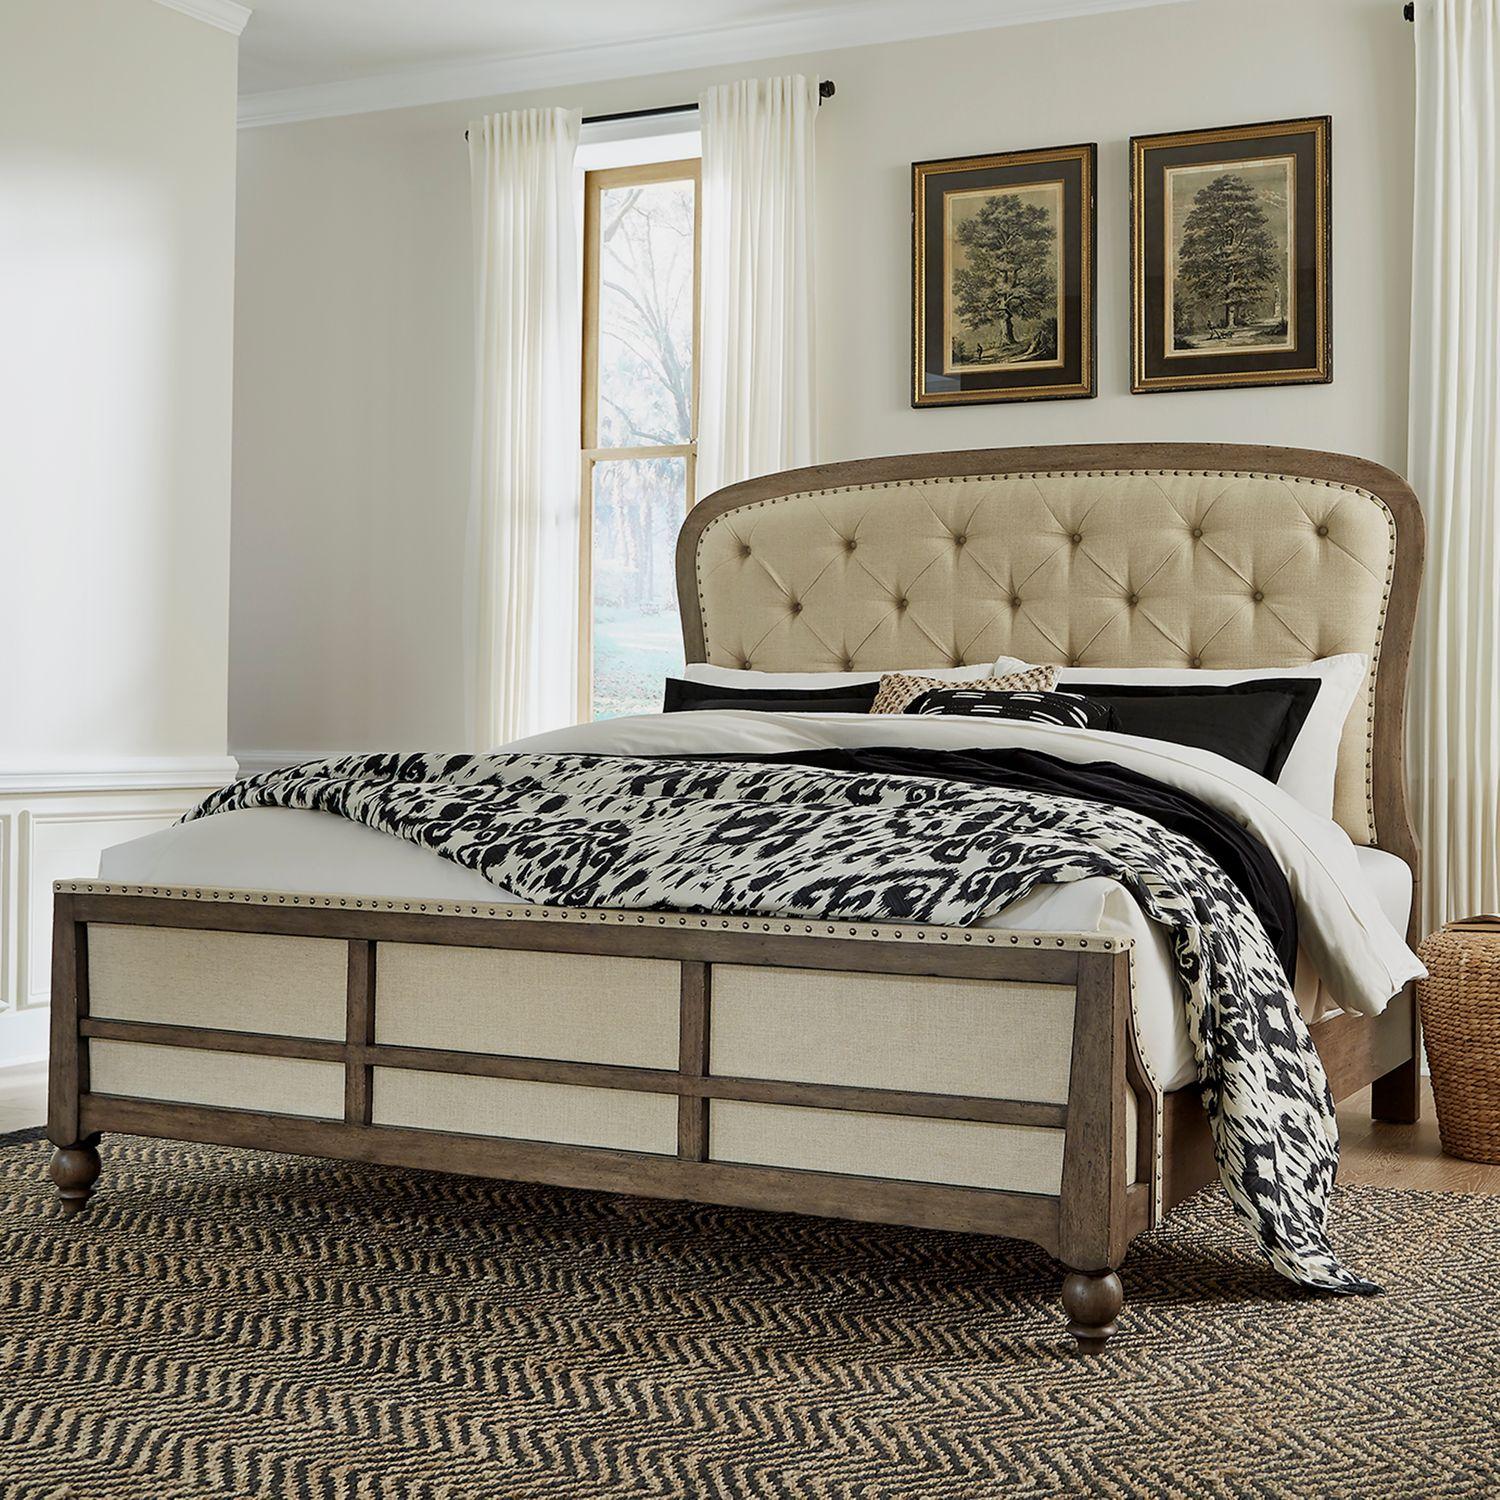 Transitional Upholstered Bed Americana Farmhouse (615-BR) 615-BR-QSH in Taupe, Black Linen